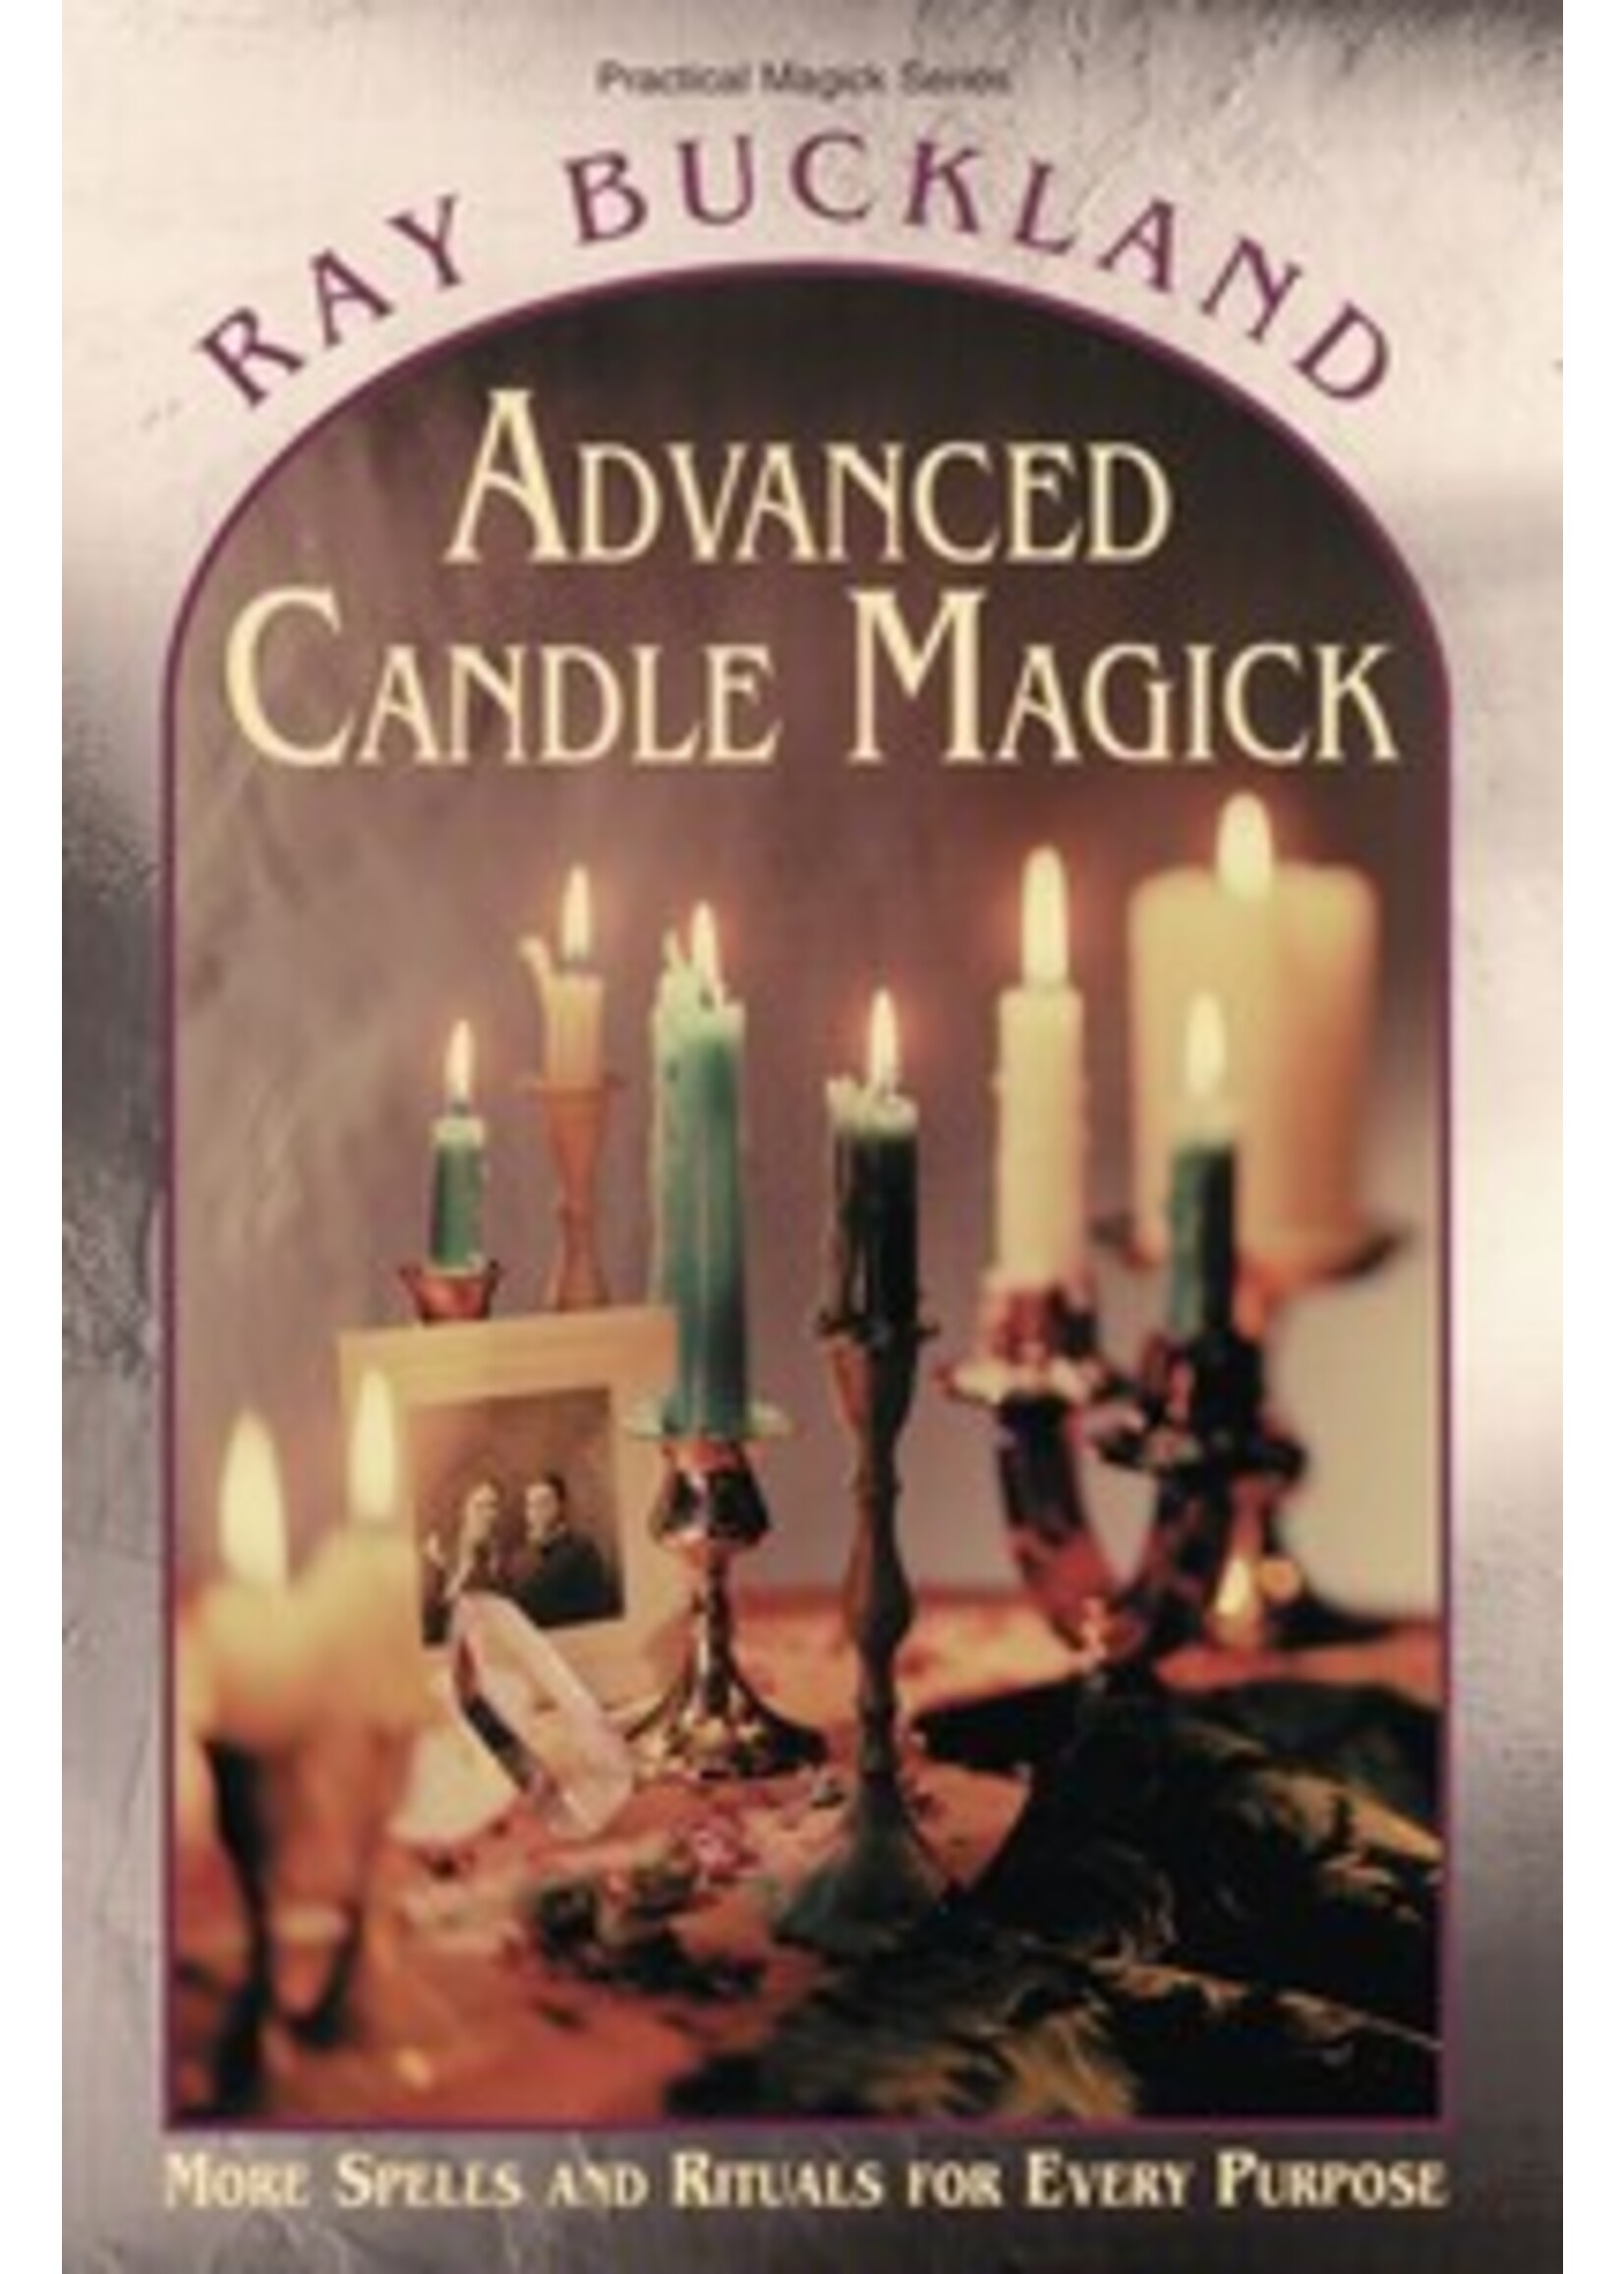 Advanced Candle Magick by Ray Buckland